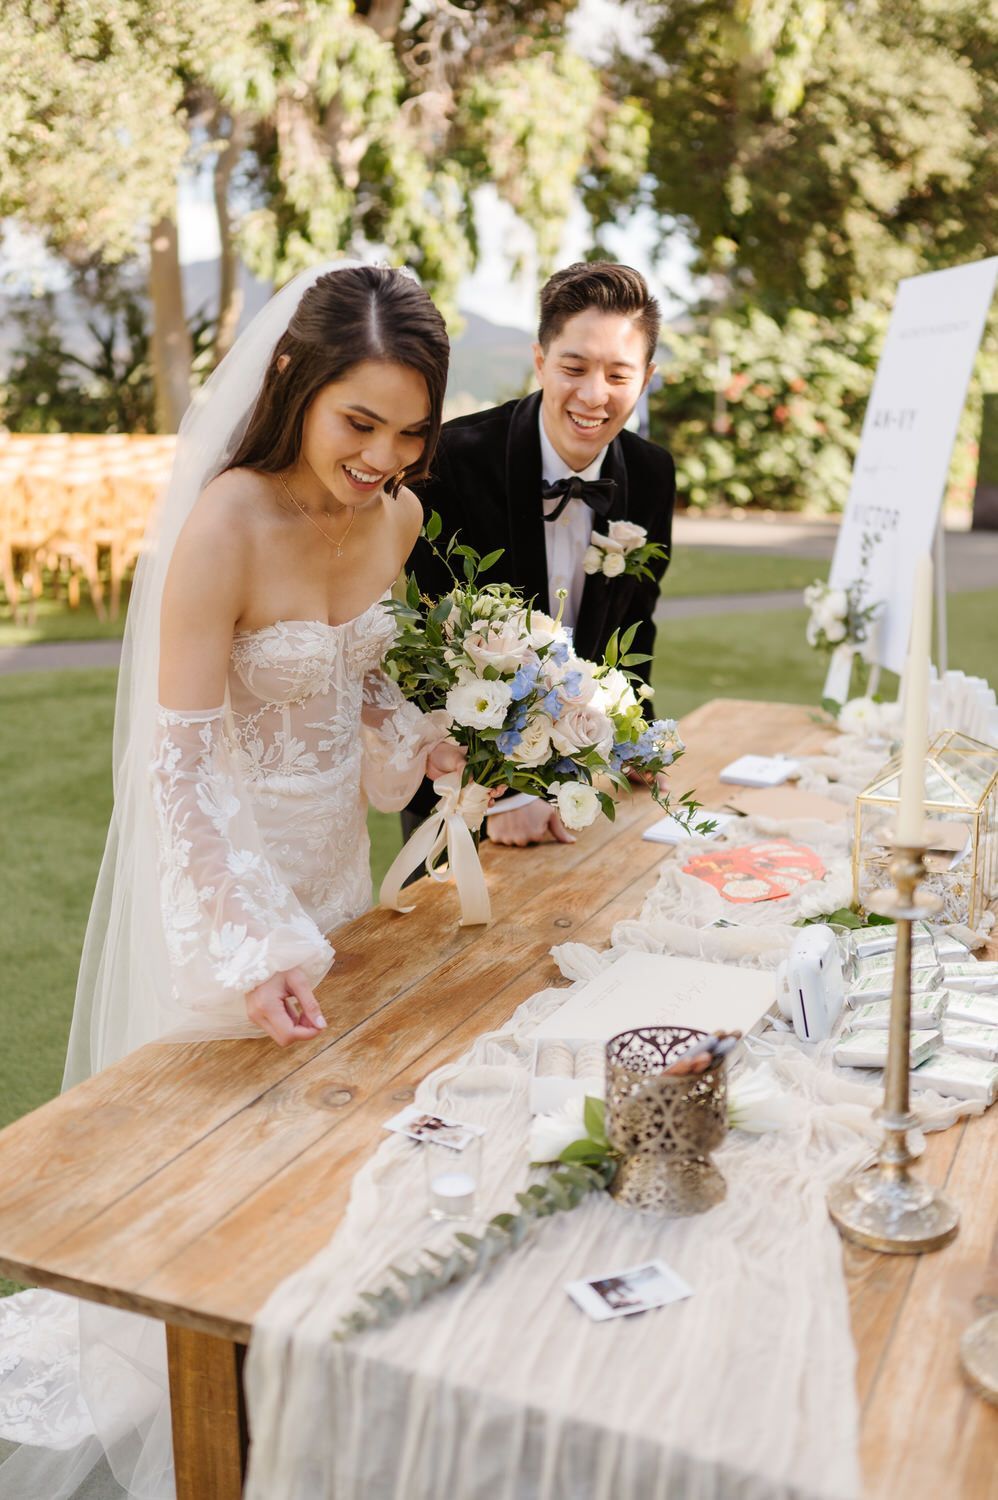 A bride and groom are signing their wedding invitations at a wooden table.